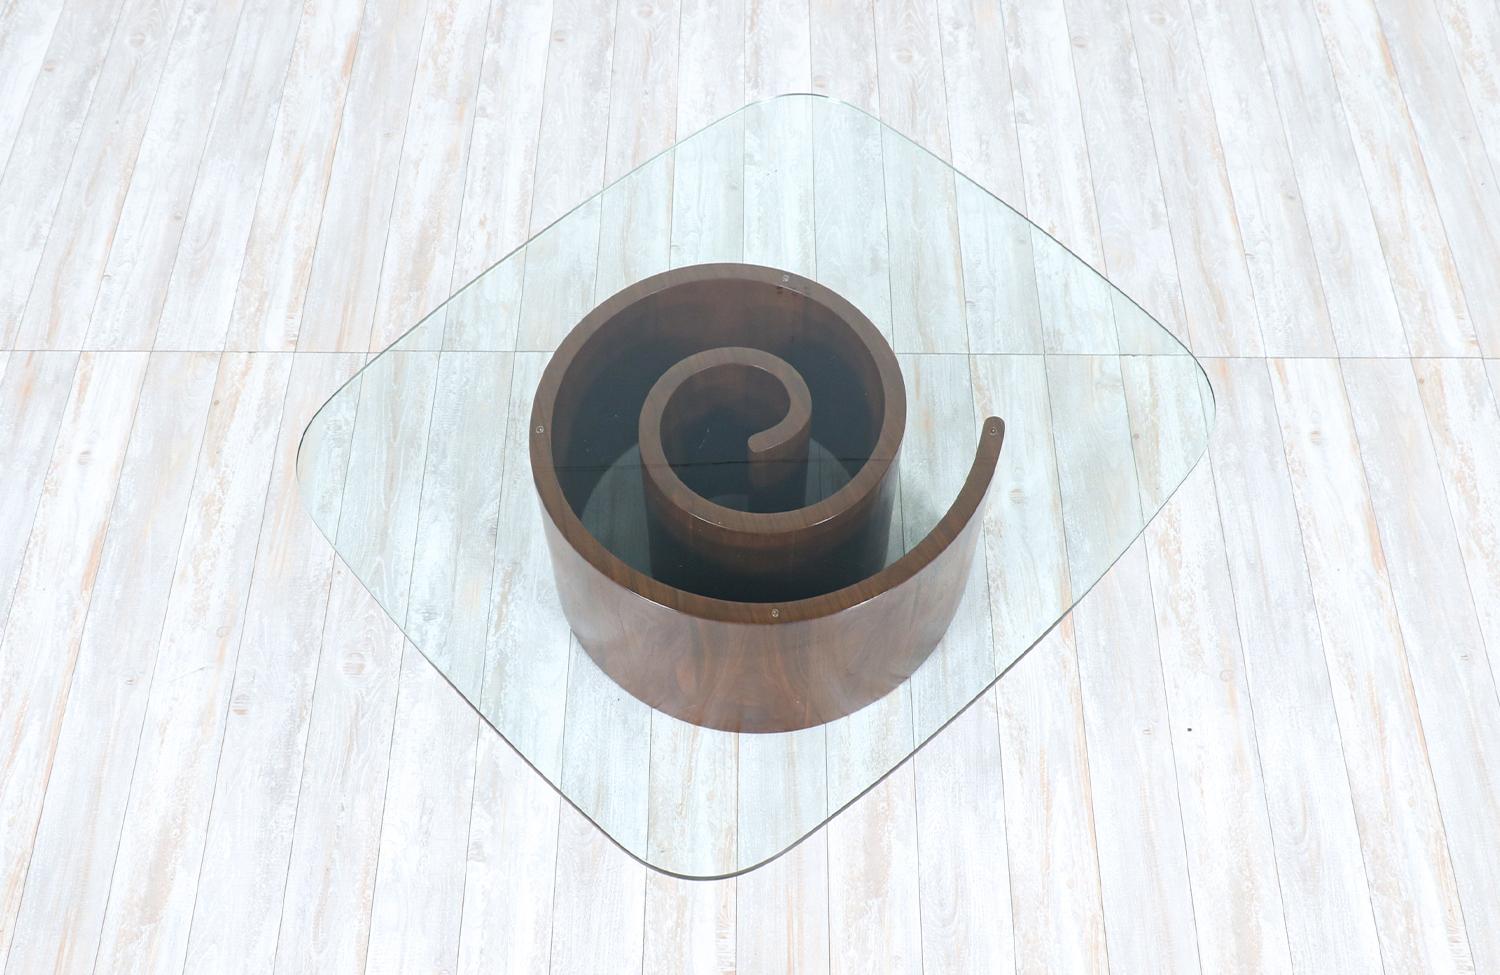 Mid-Century Modern Vladimir Kagan “Snail” Coffee Table with Glass Top for Selig